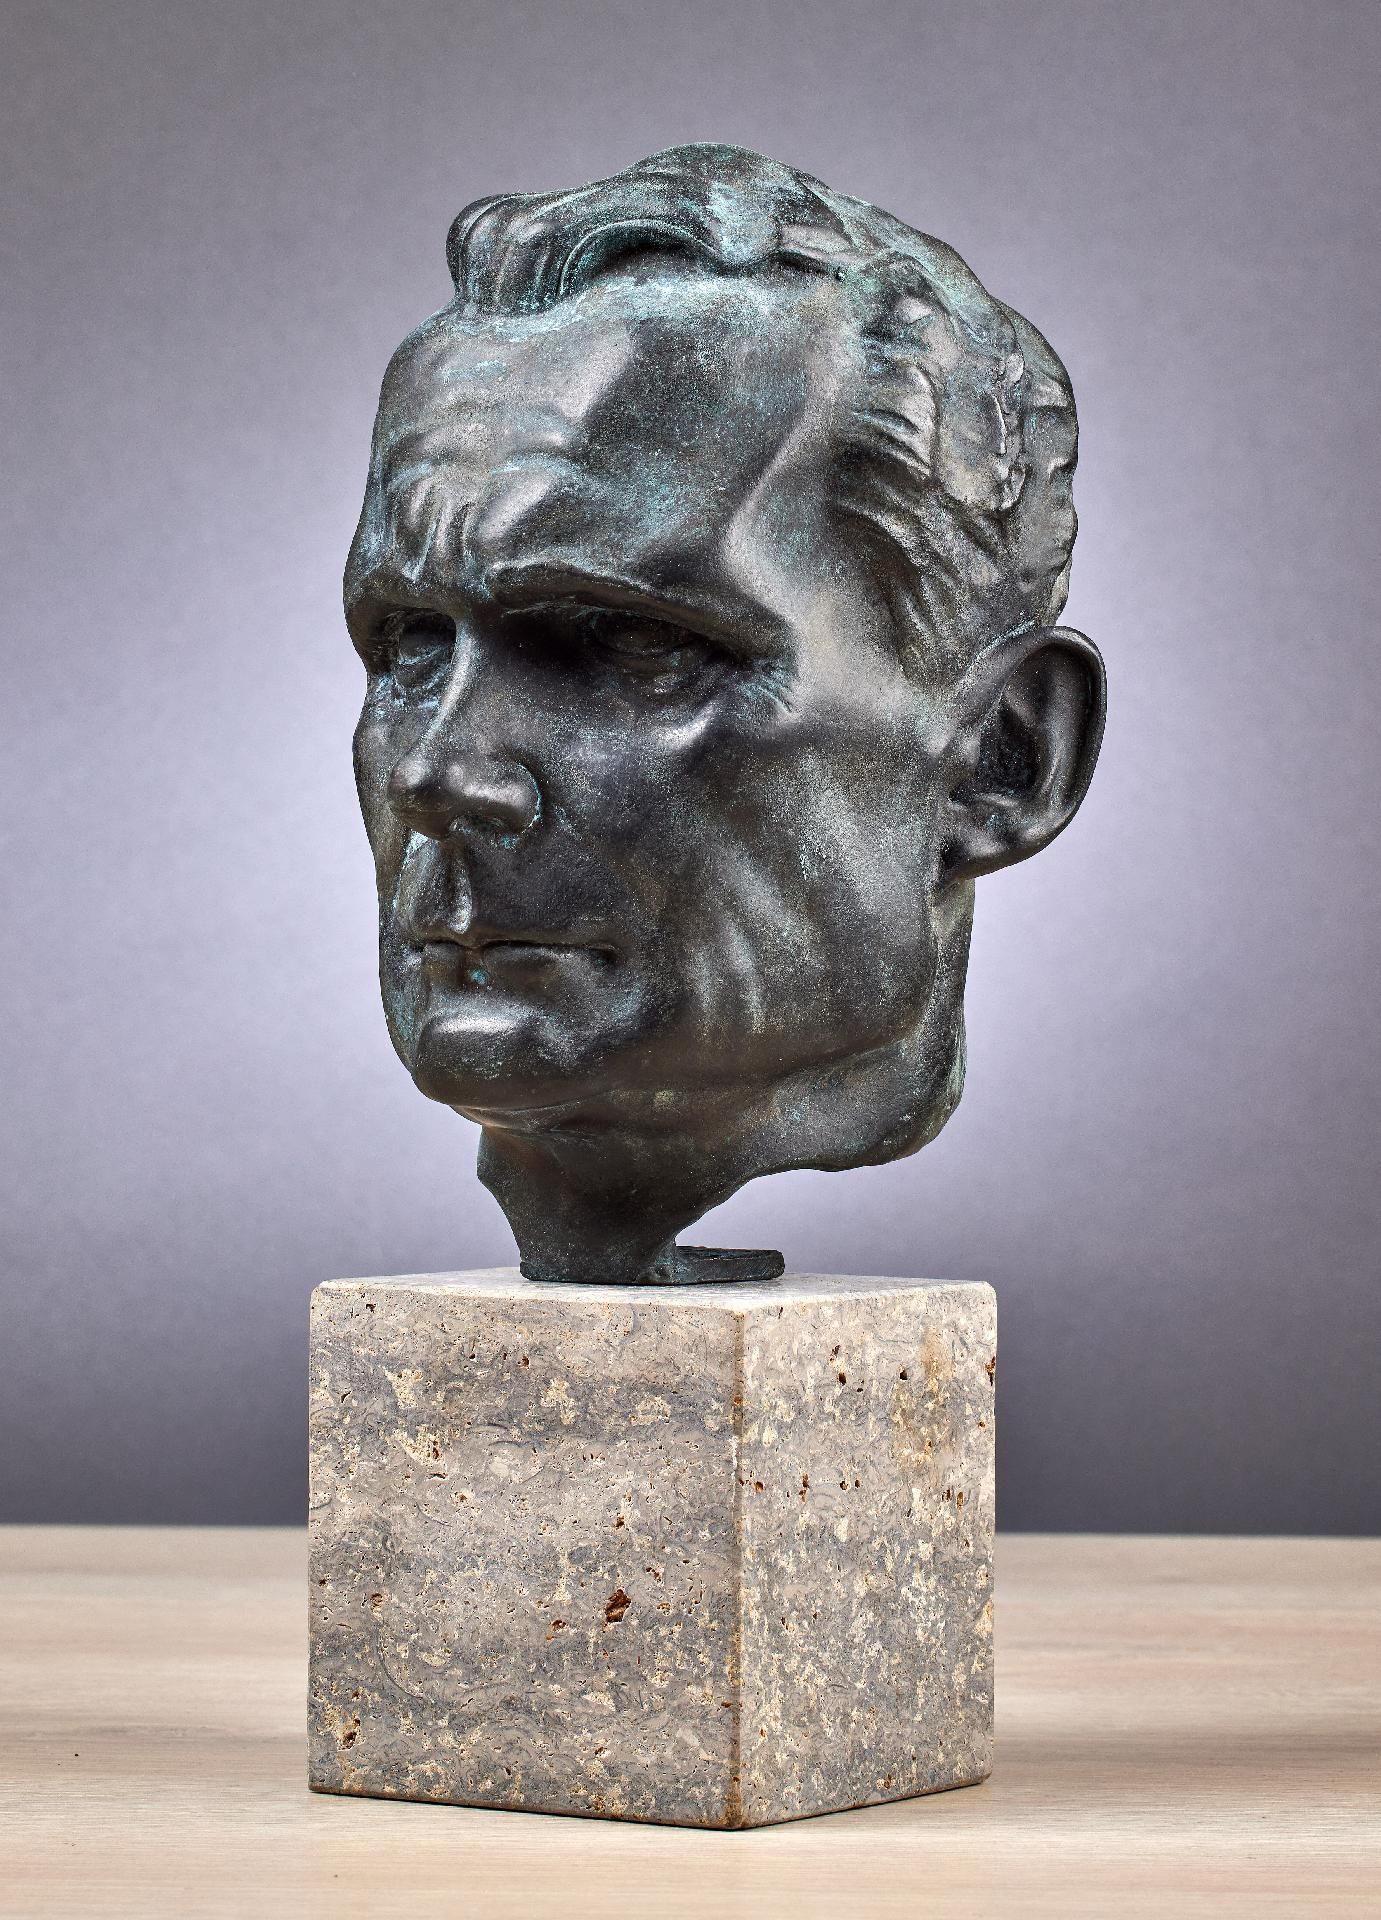 Art in The Third Reich 1933 - 1945 : H.J. Pagels: Portrait bust of Rudolf Hess. - Image 2 of 5